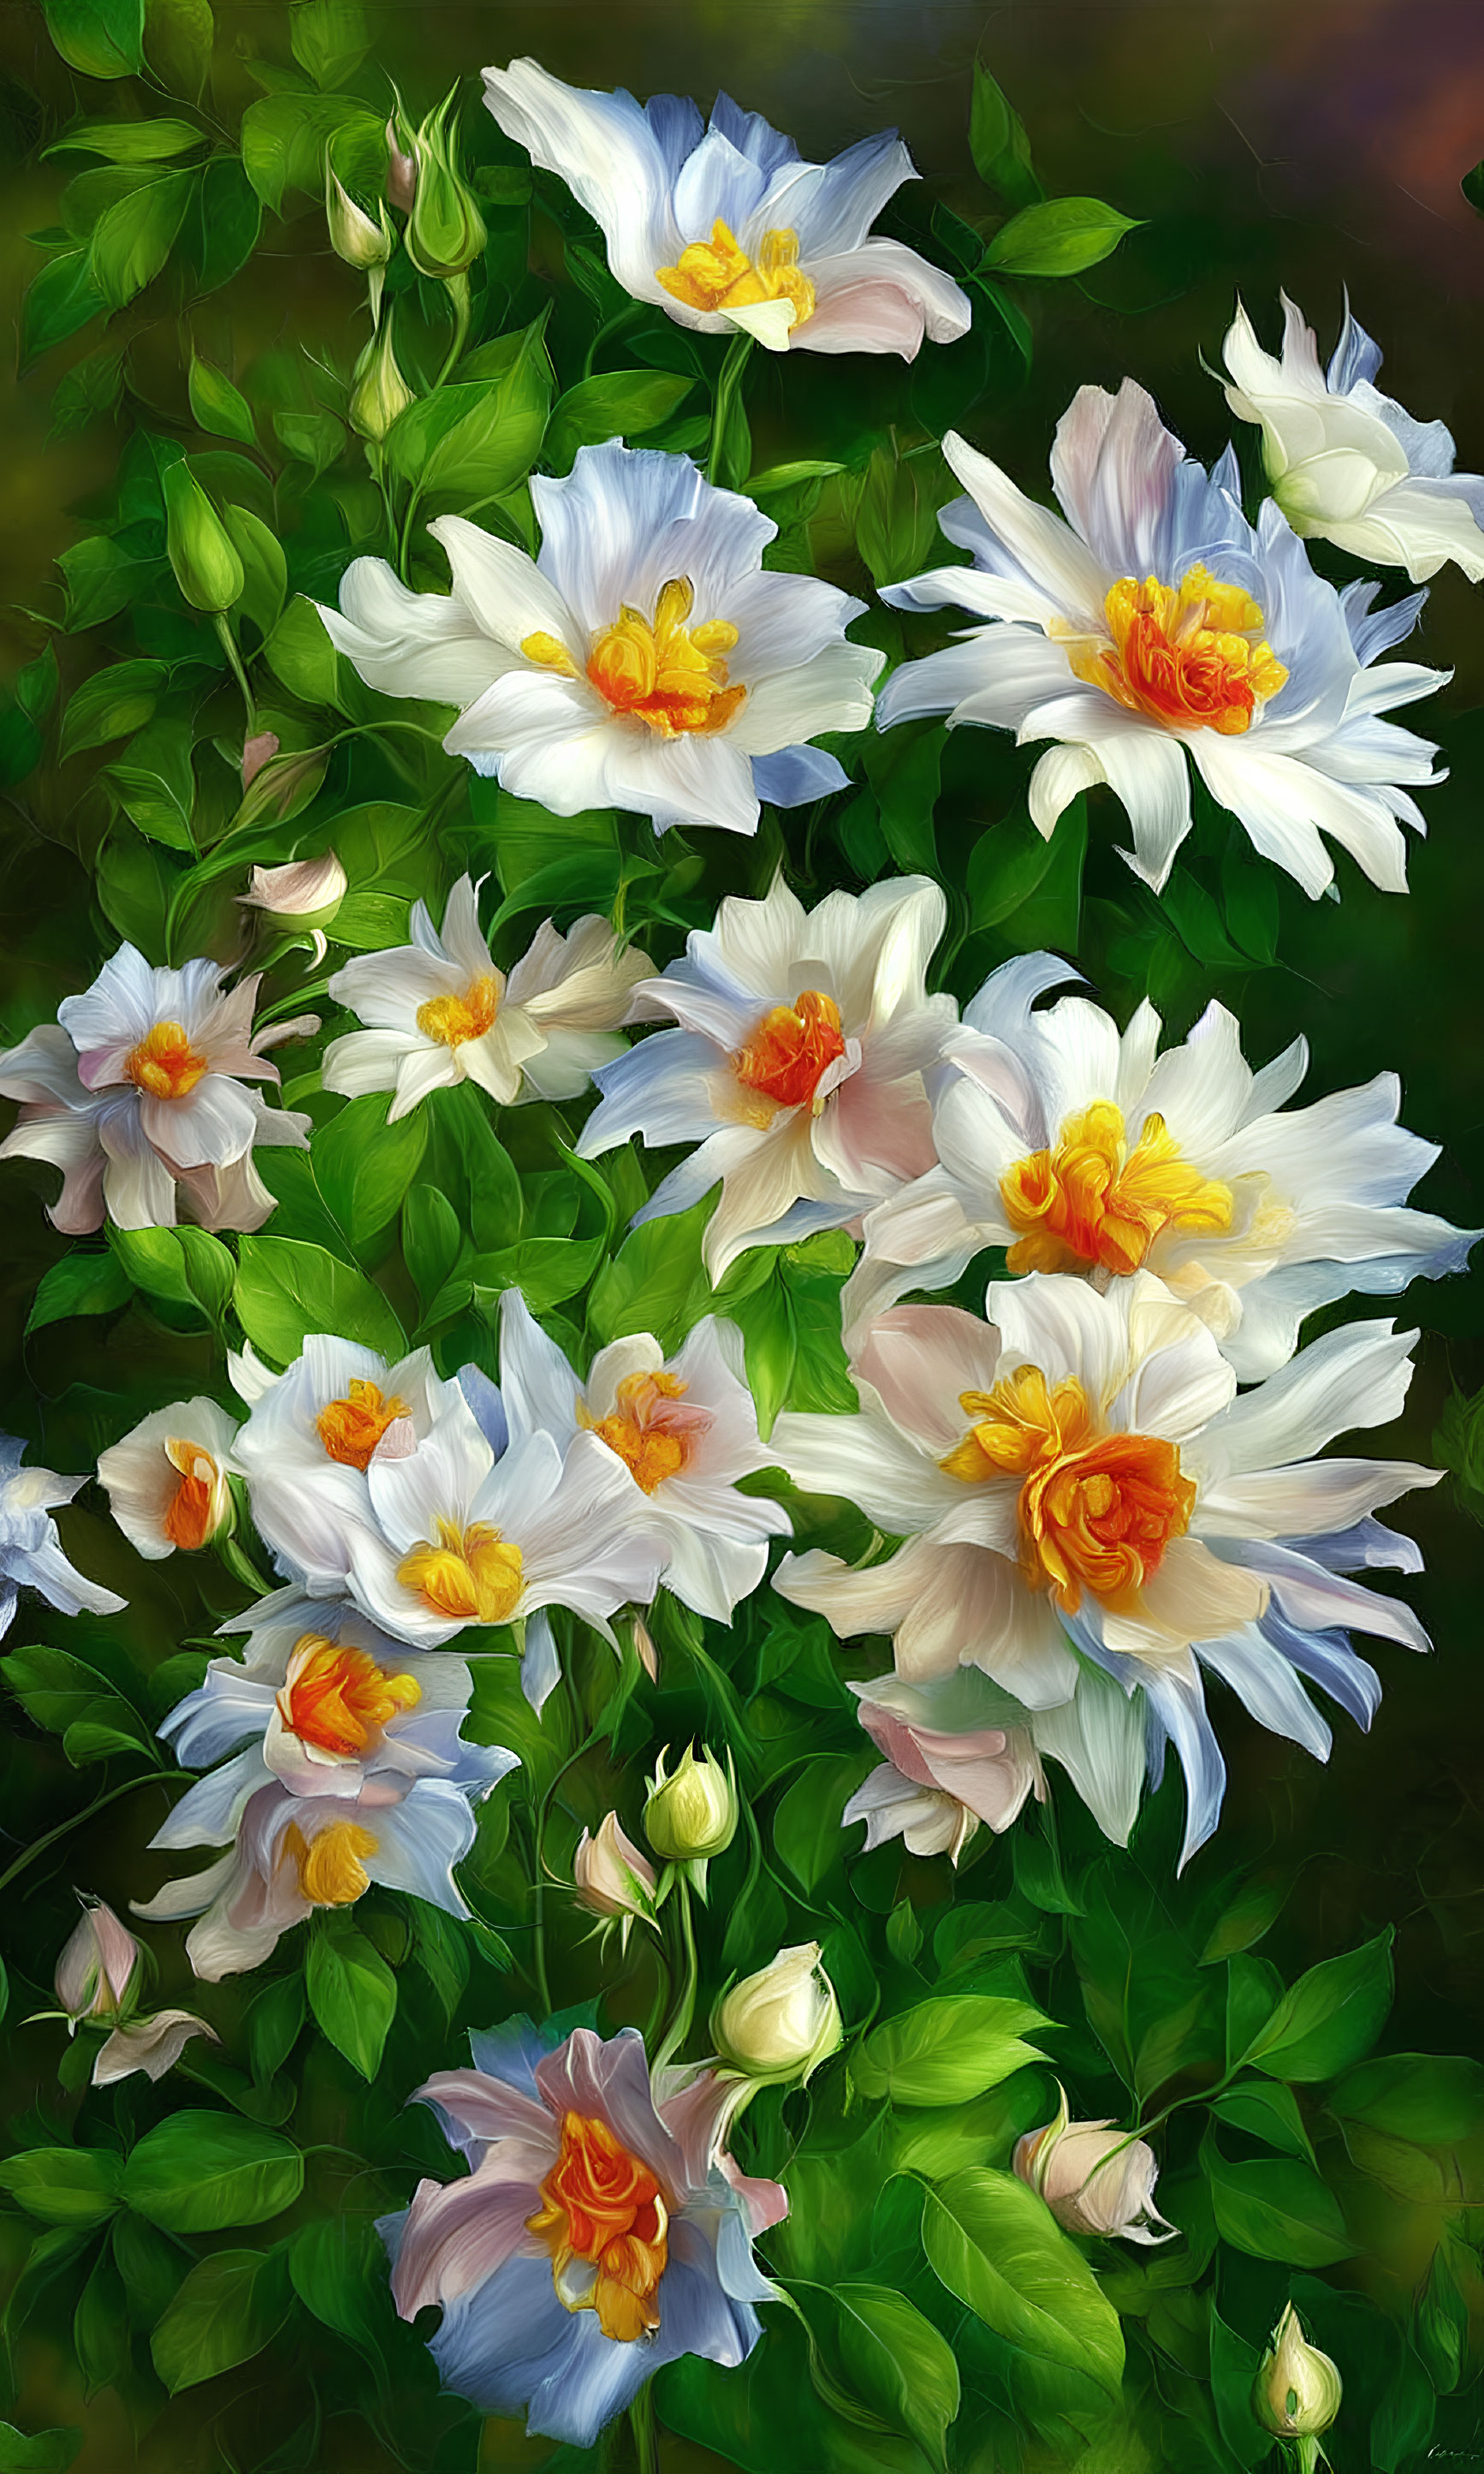 White Flowers with Yellow Centers and Green Leaves Displayed